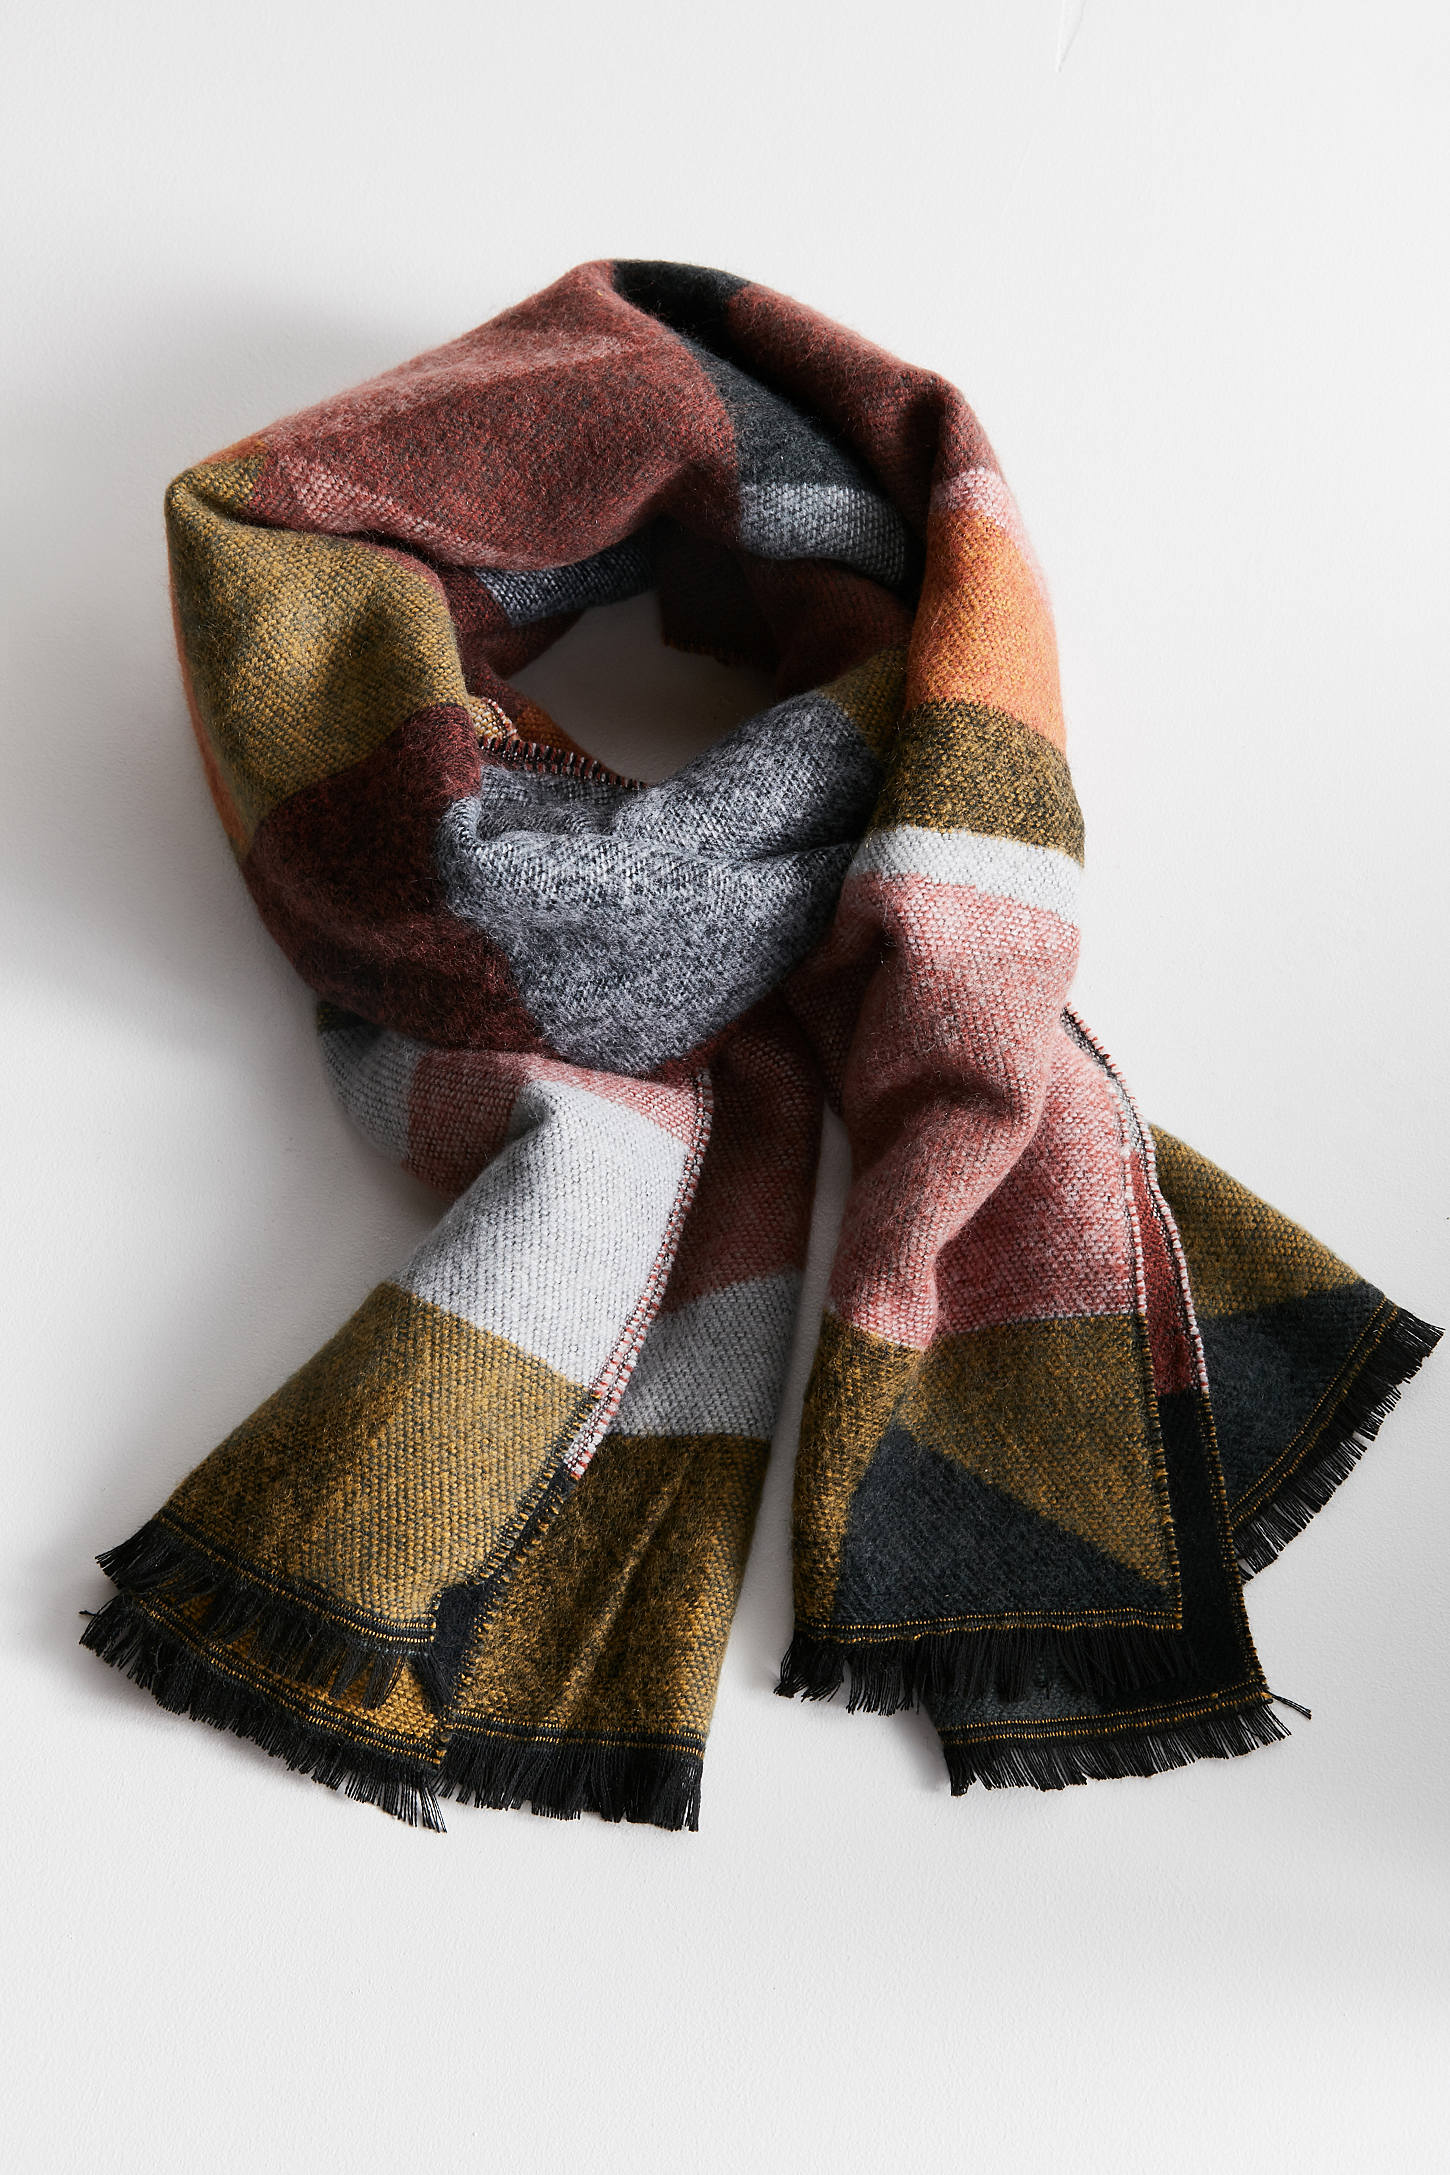 Southwestern Woven Blanket Scarf | Urban Outfitters